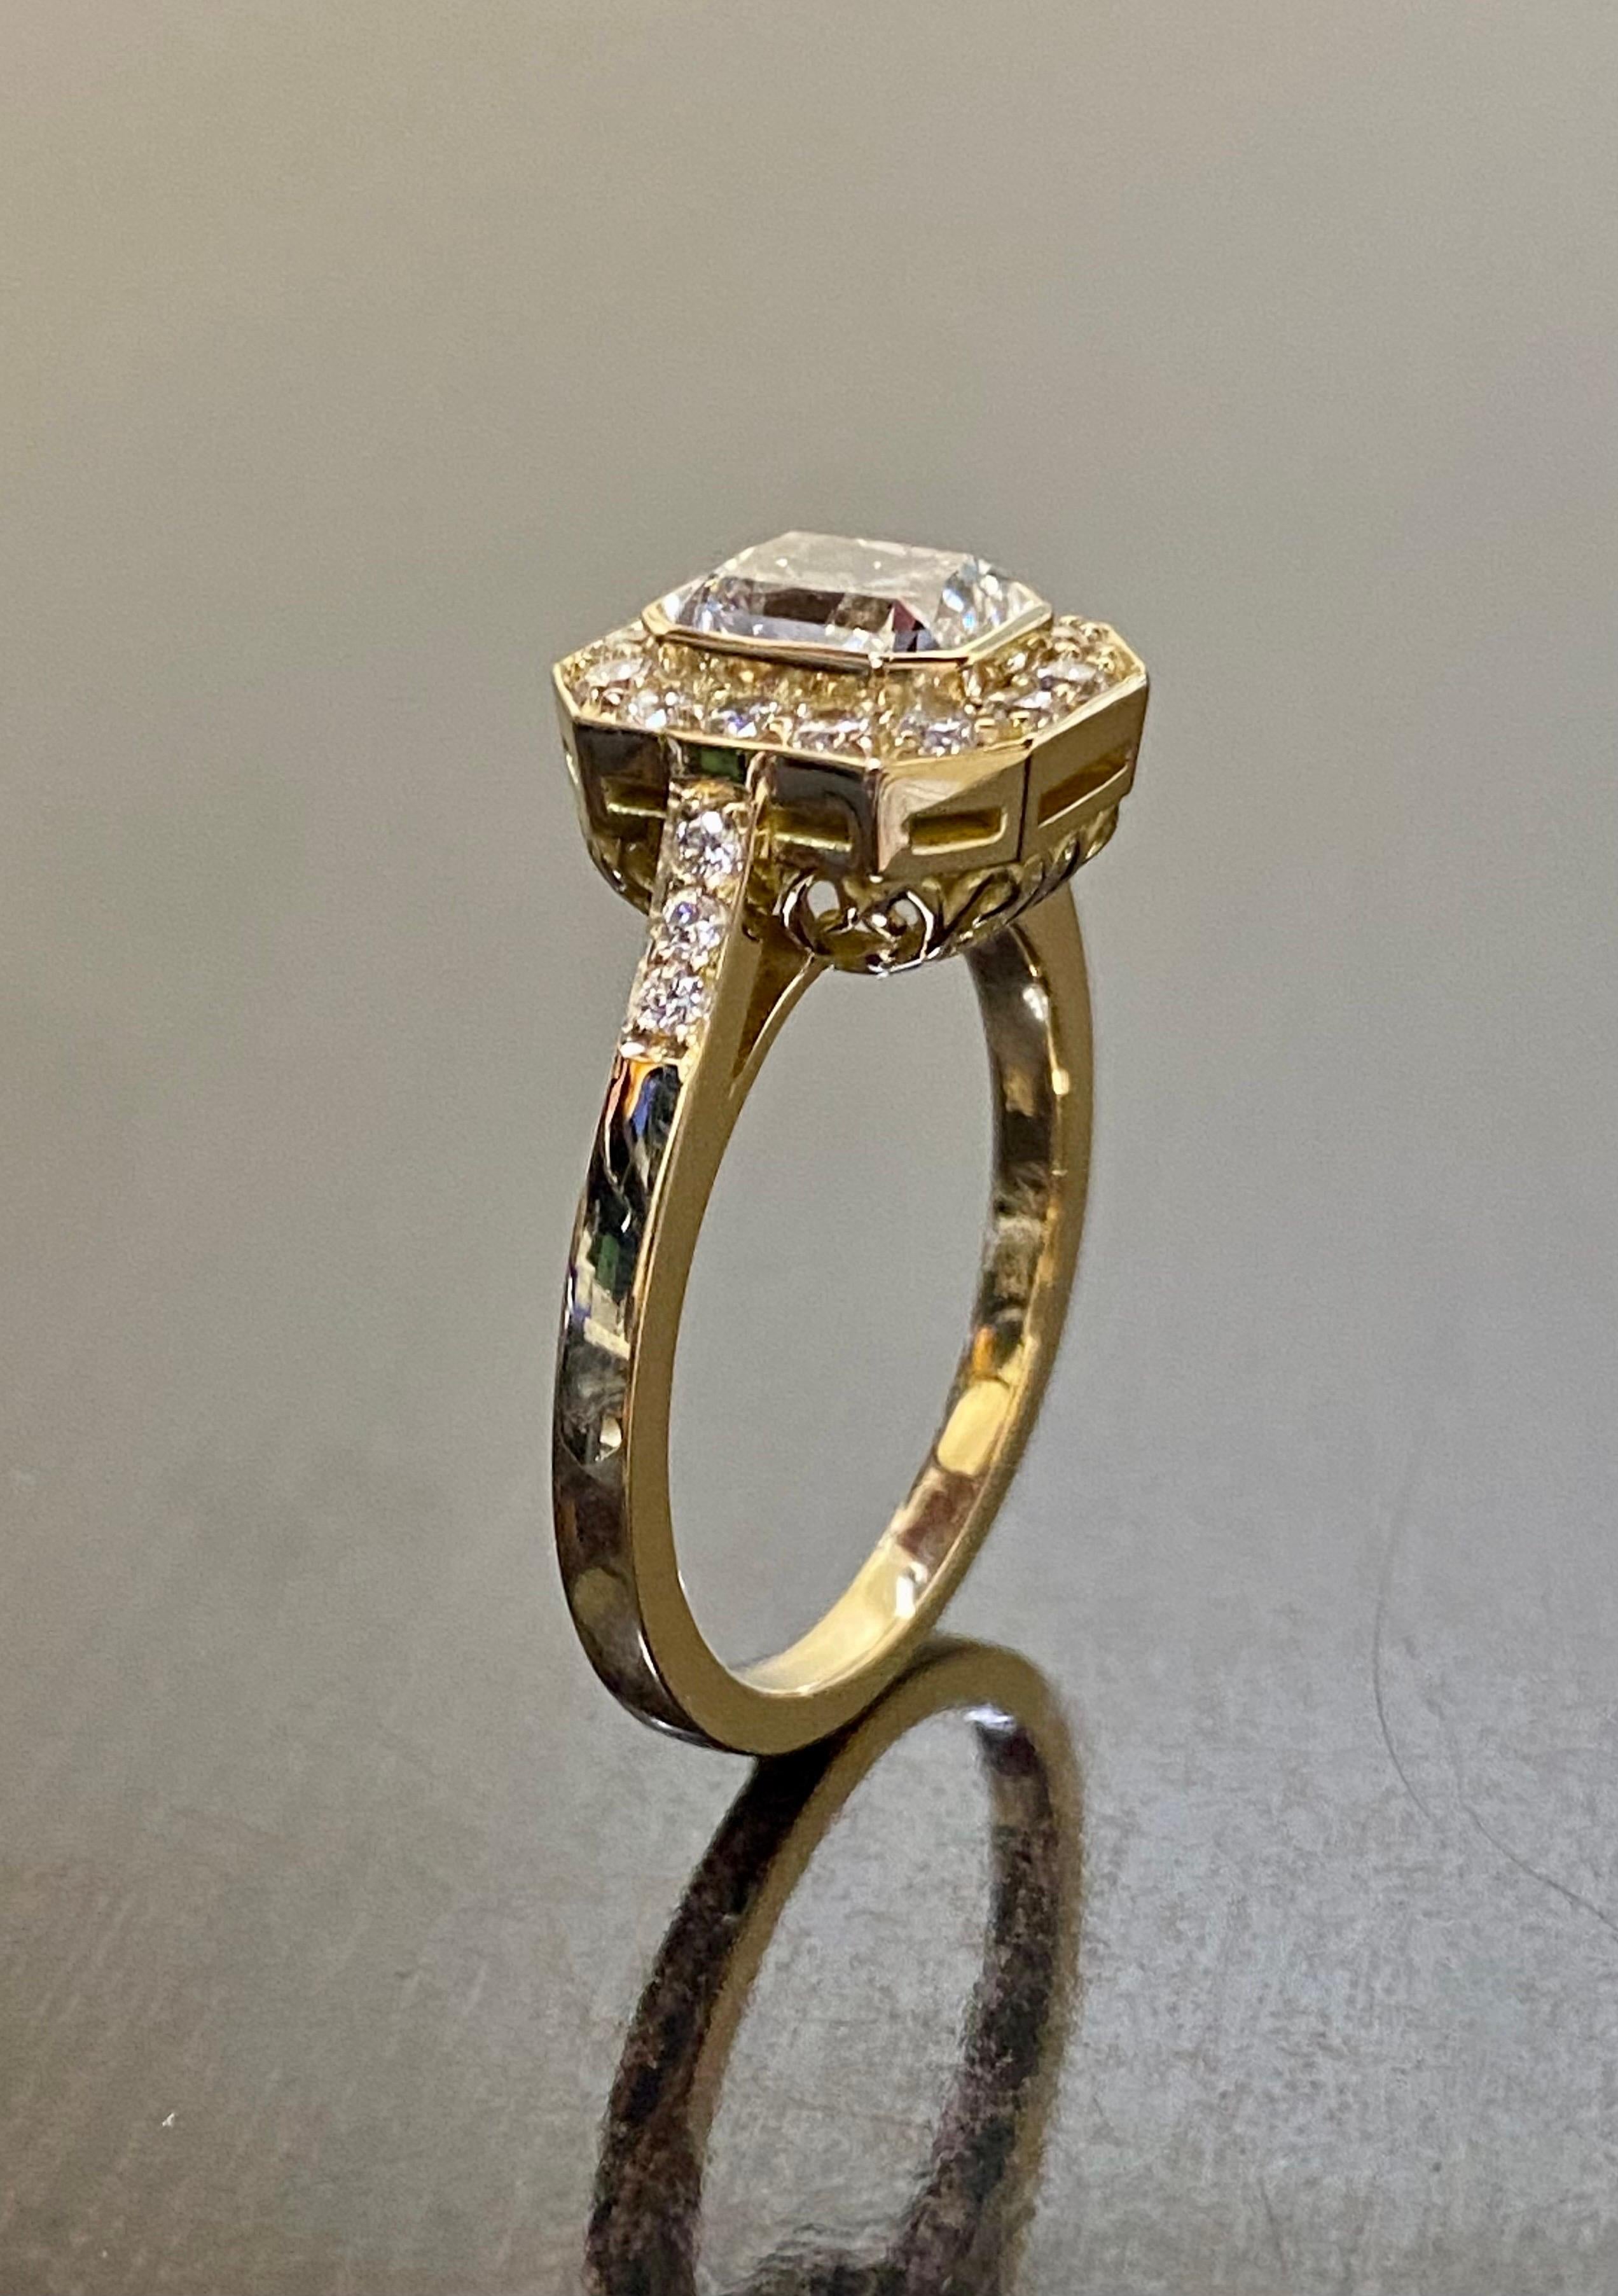 DeKara Designs Collection

Metal- 18K Yellow Gold, .750.

Stones- GIA Certified Radiant Cut Diamond J Color SI2 Clarity 1.50 Carats, 20 Round Diamonds G-H Color VS2 Clarity 0.36 Carats.

Entirely handmade, modern and timeless 18K yellow gold Radiant